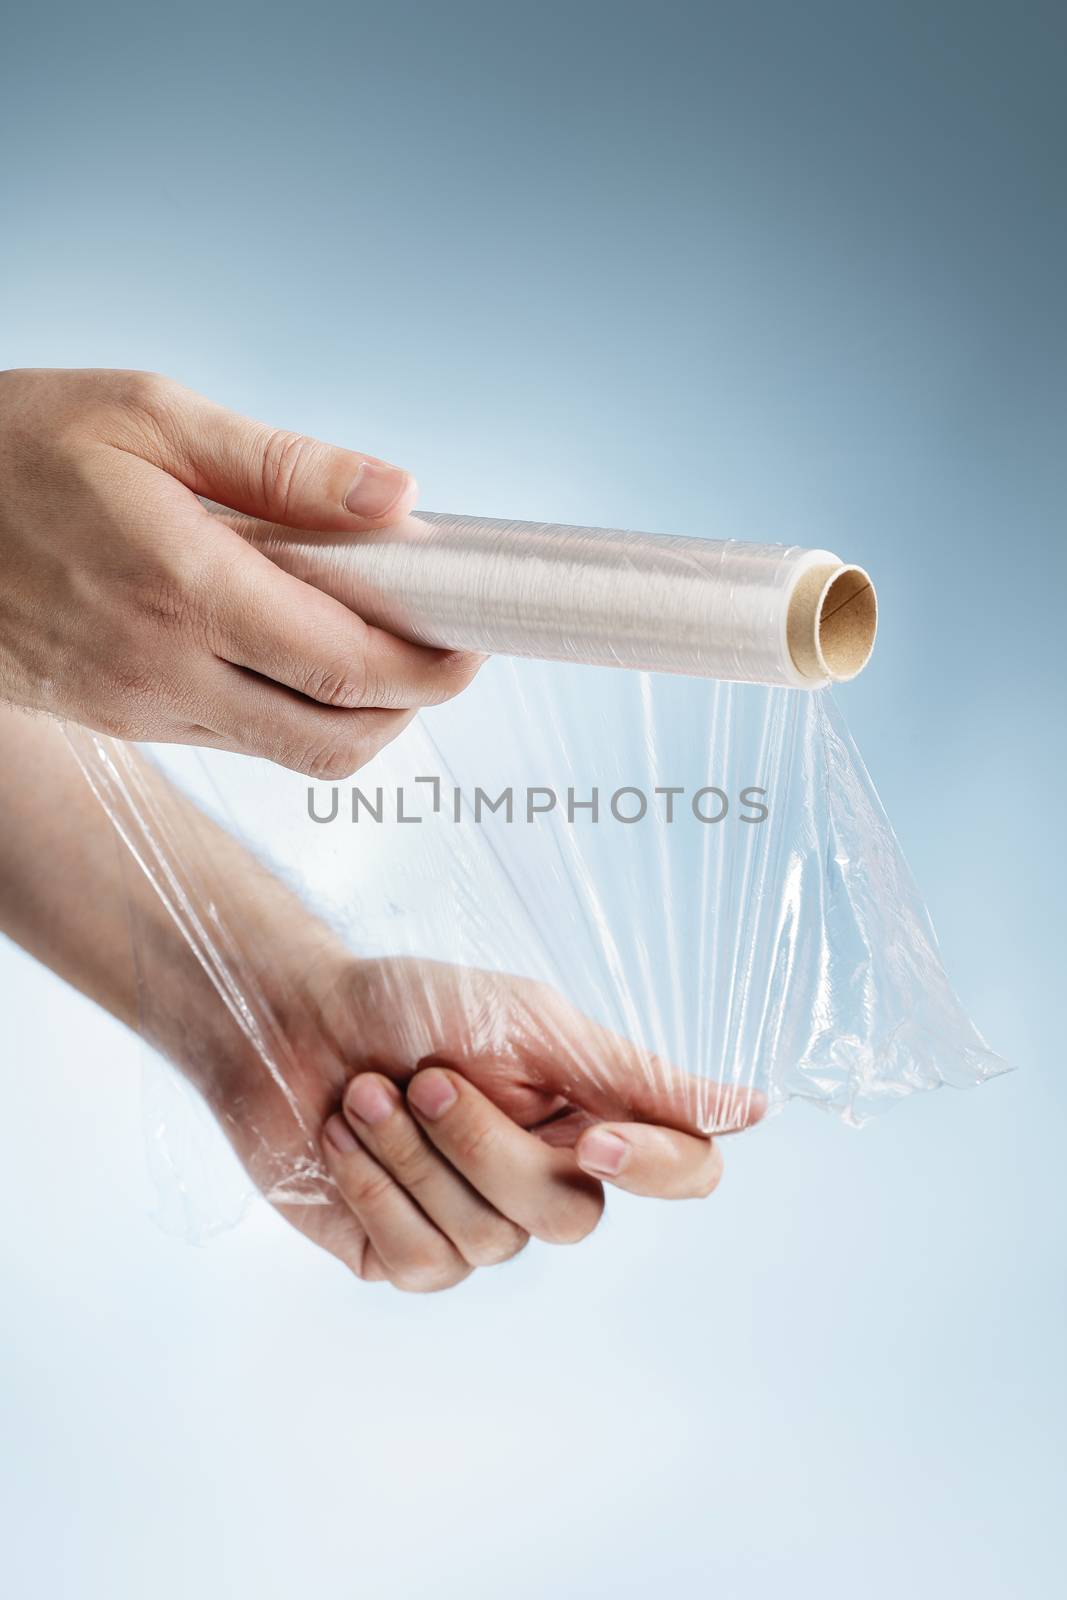 Man holding a roll of plastic film, typically used for sealing food items.